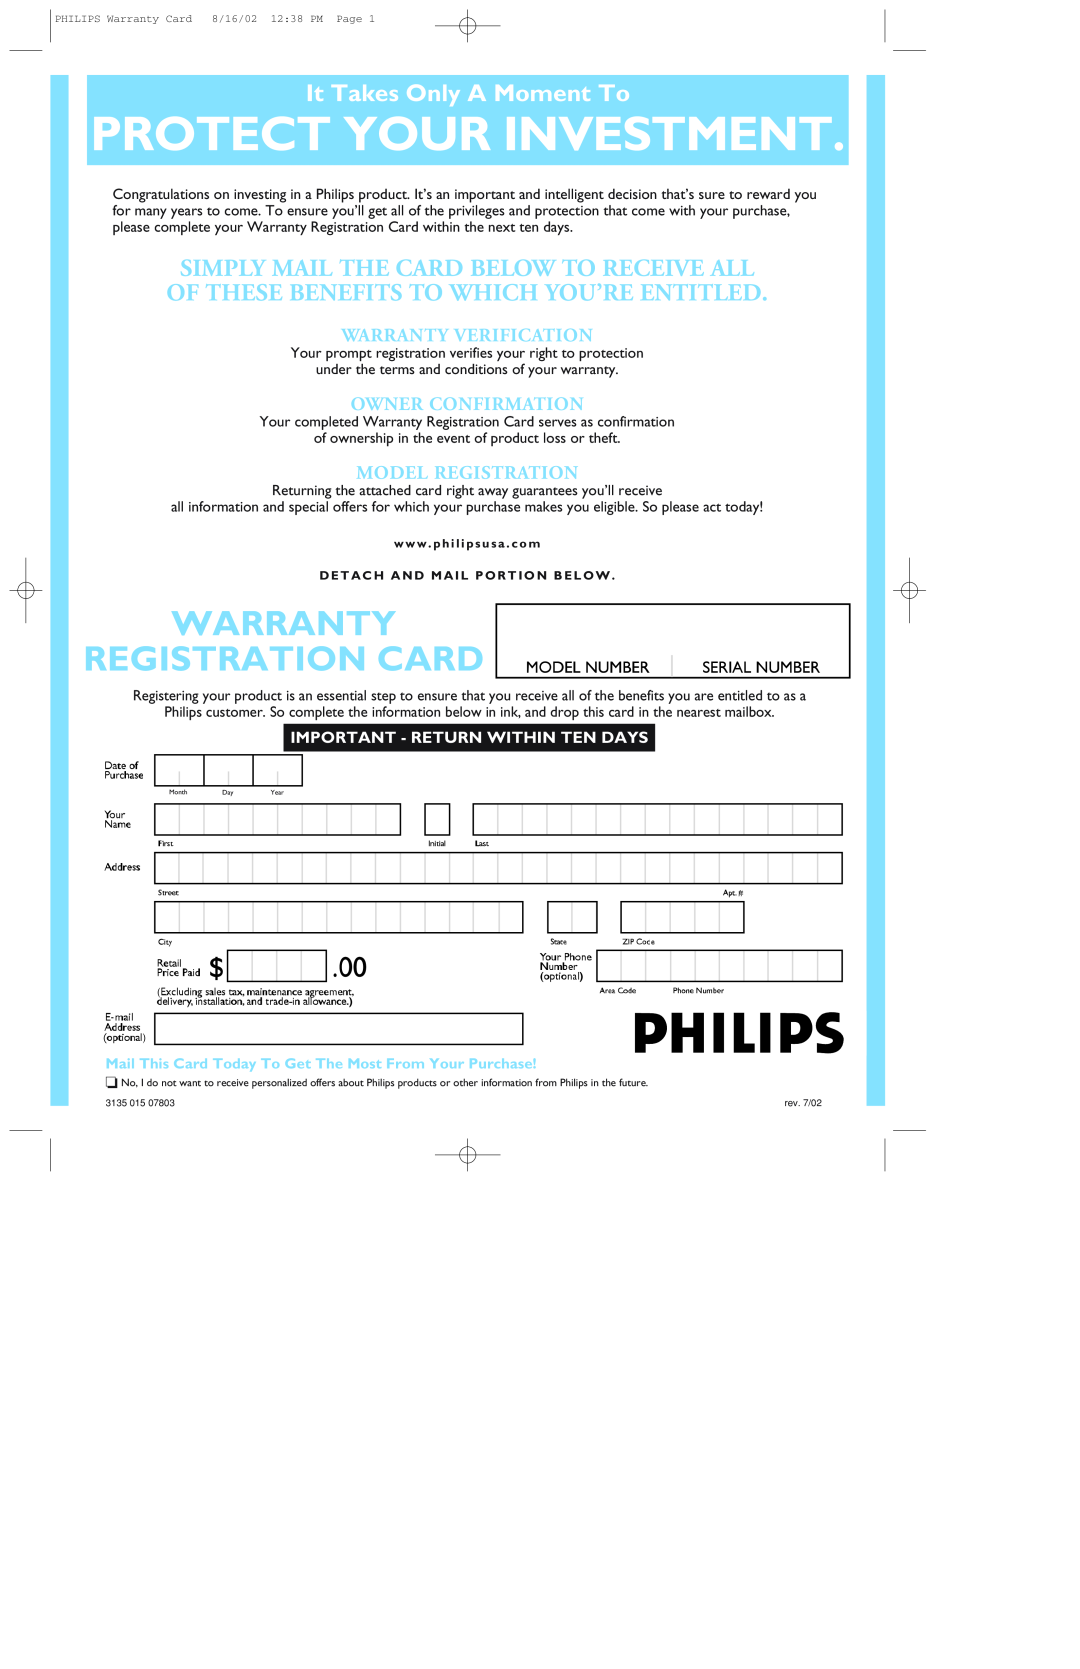 Philips 200XW7 Protect Your Investment, Warranty Registration Card, It Takes Only A Moment To, Warranty Verification 